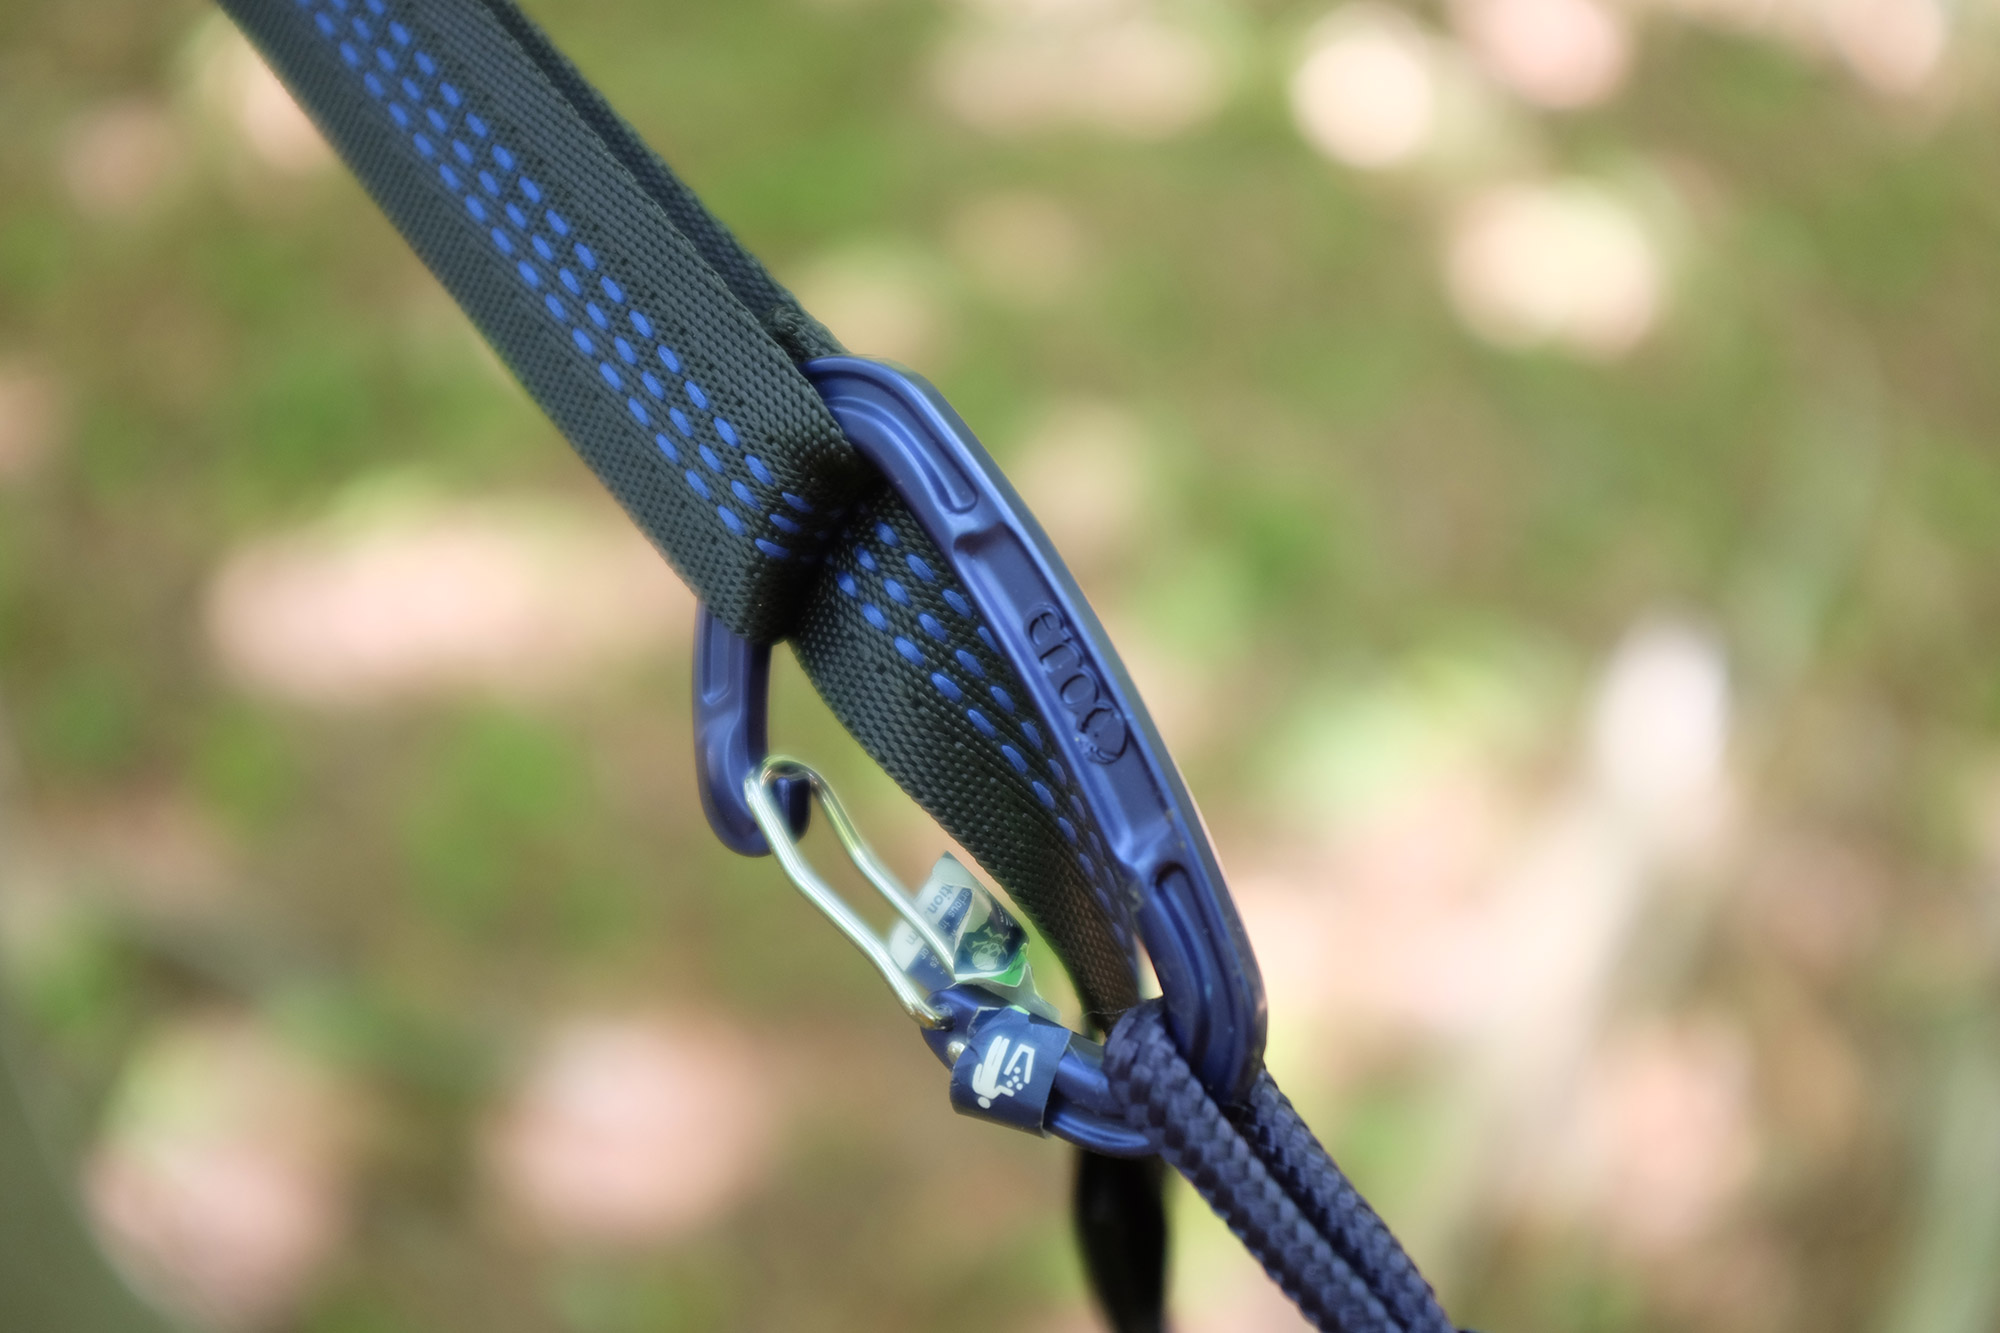 The Atlas Hammock Suspension System straps are webbed so it’s really, really easy to adjust the hang as needed. The unused ones are good for hanging other stuff too, like a camp light, or clothes that need drying out. | Credit: John Lepak